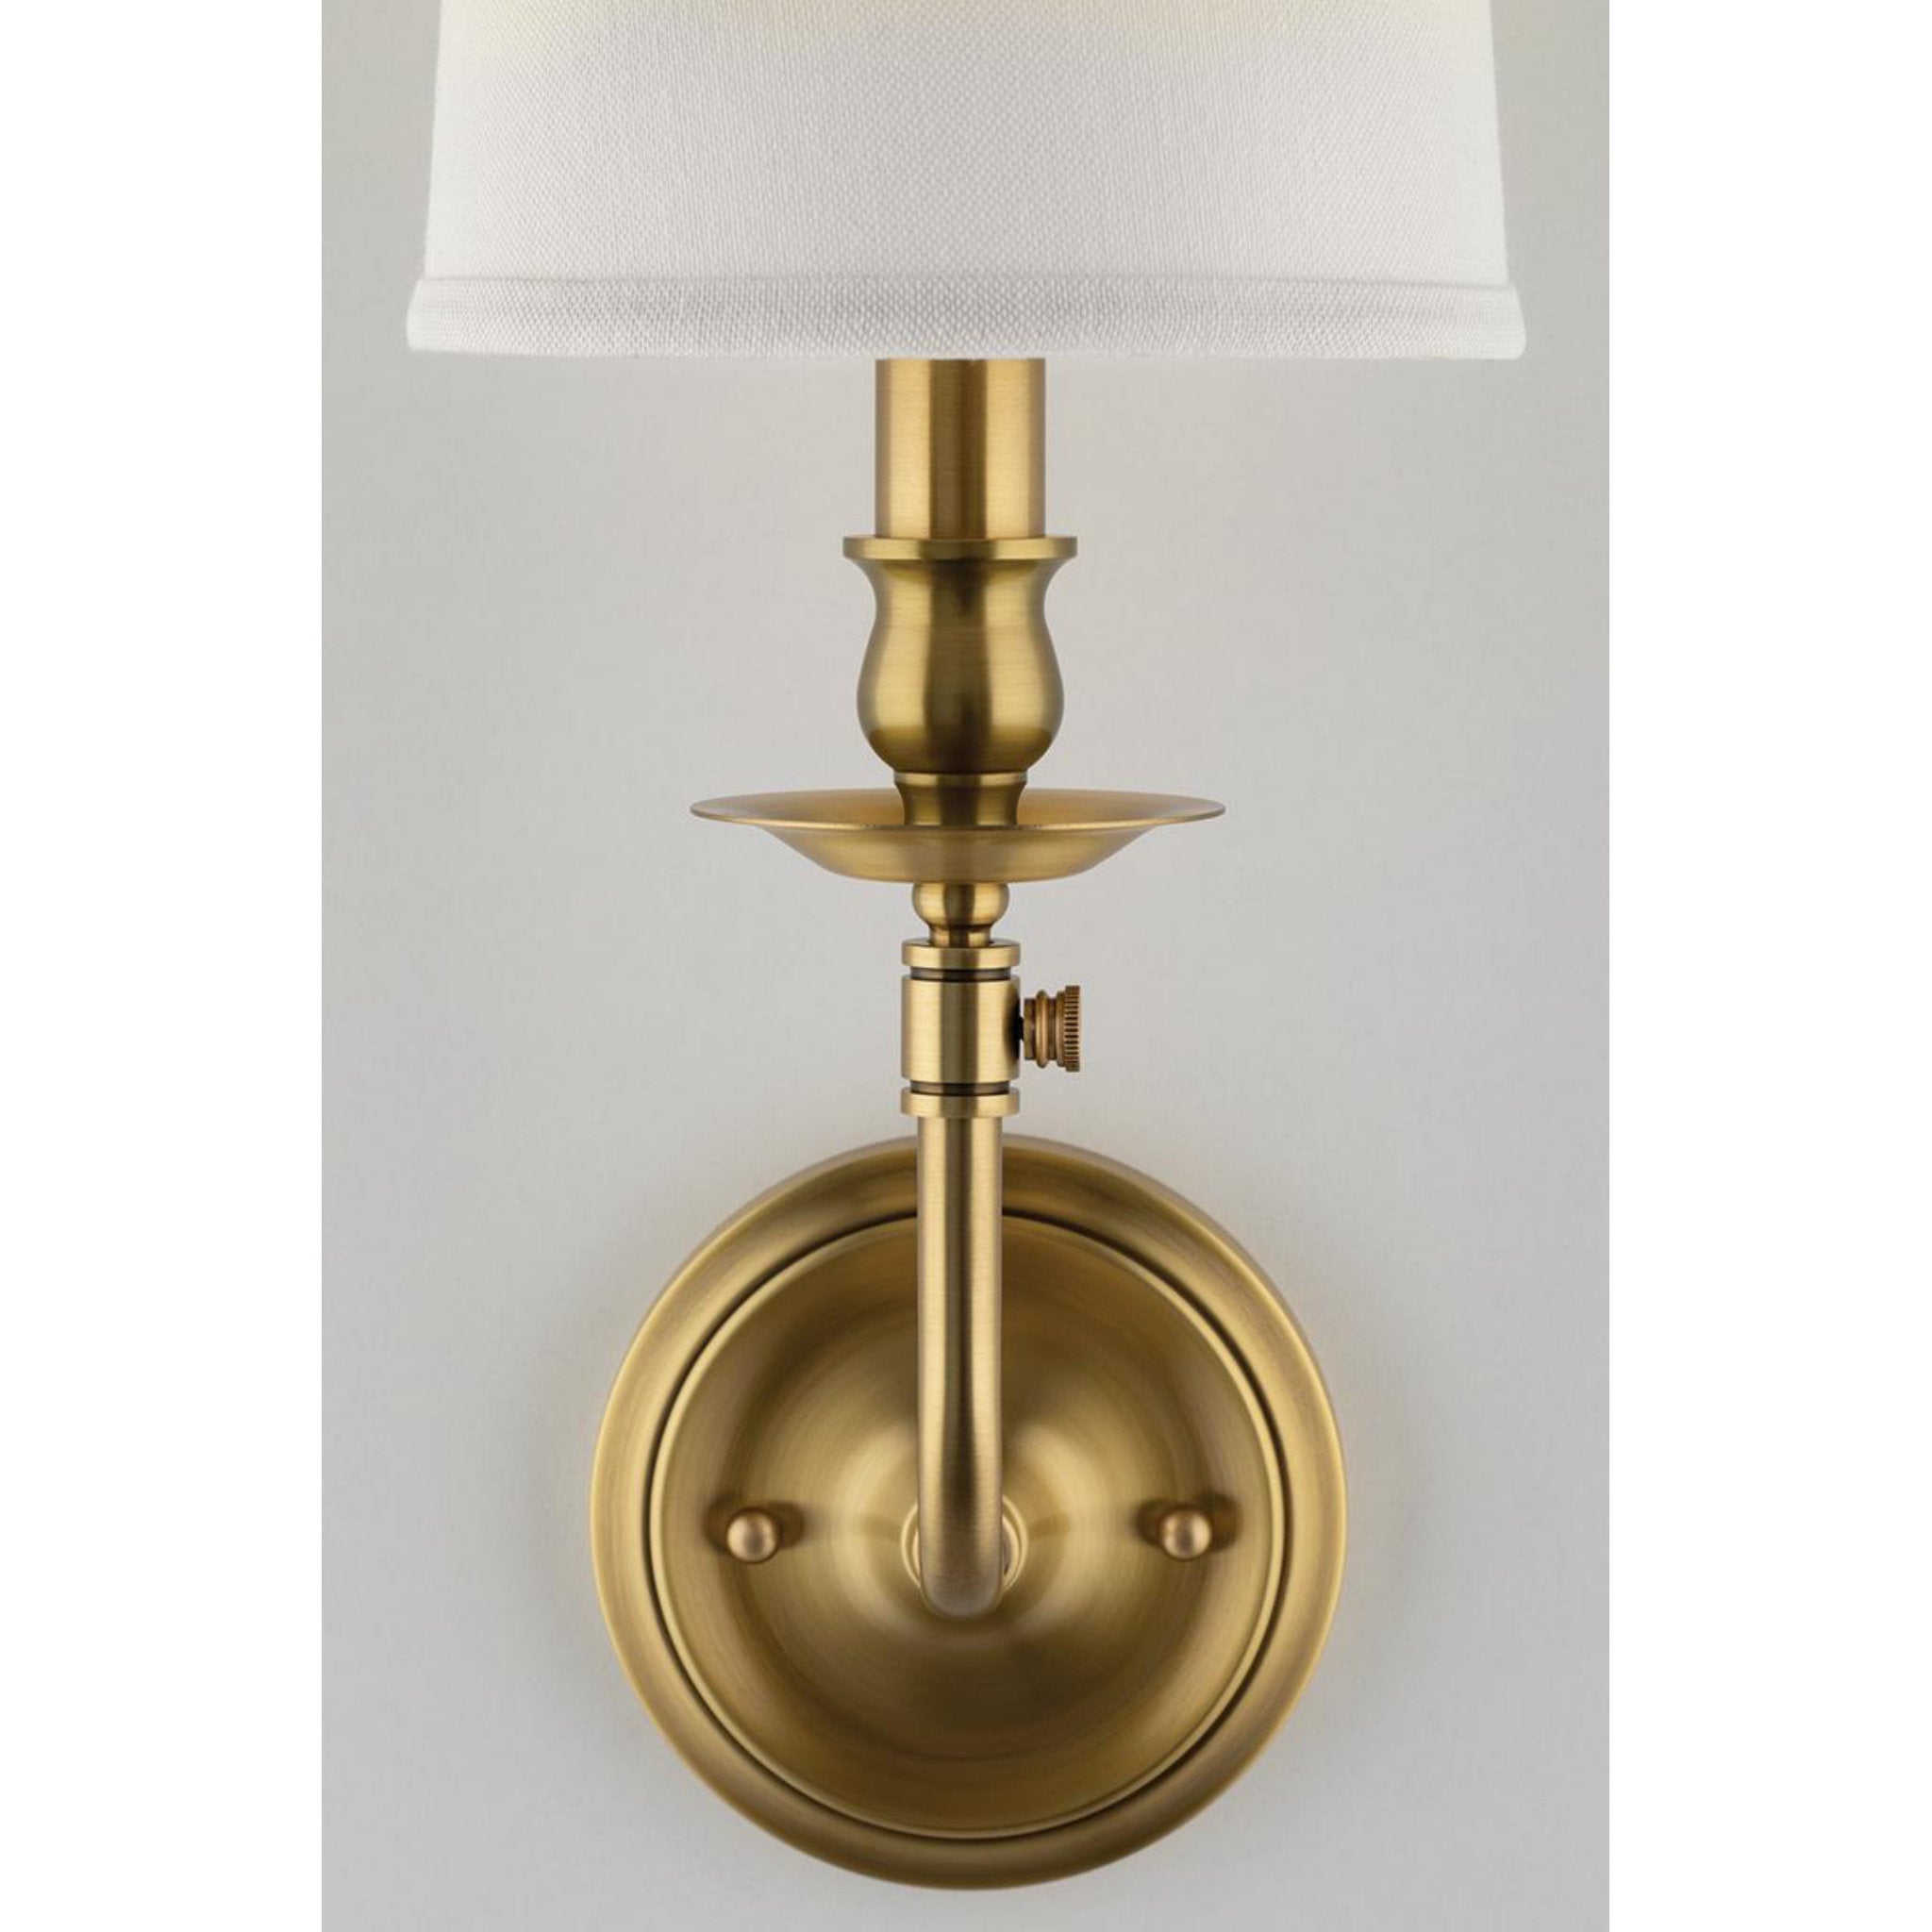 Logan 2 Light Wall Sconce in Old Bronze